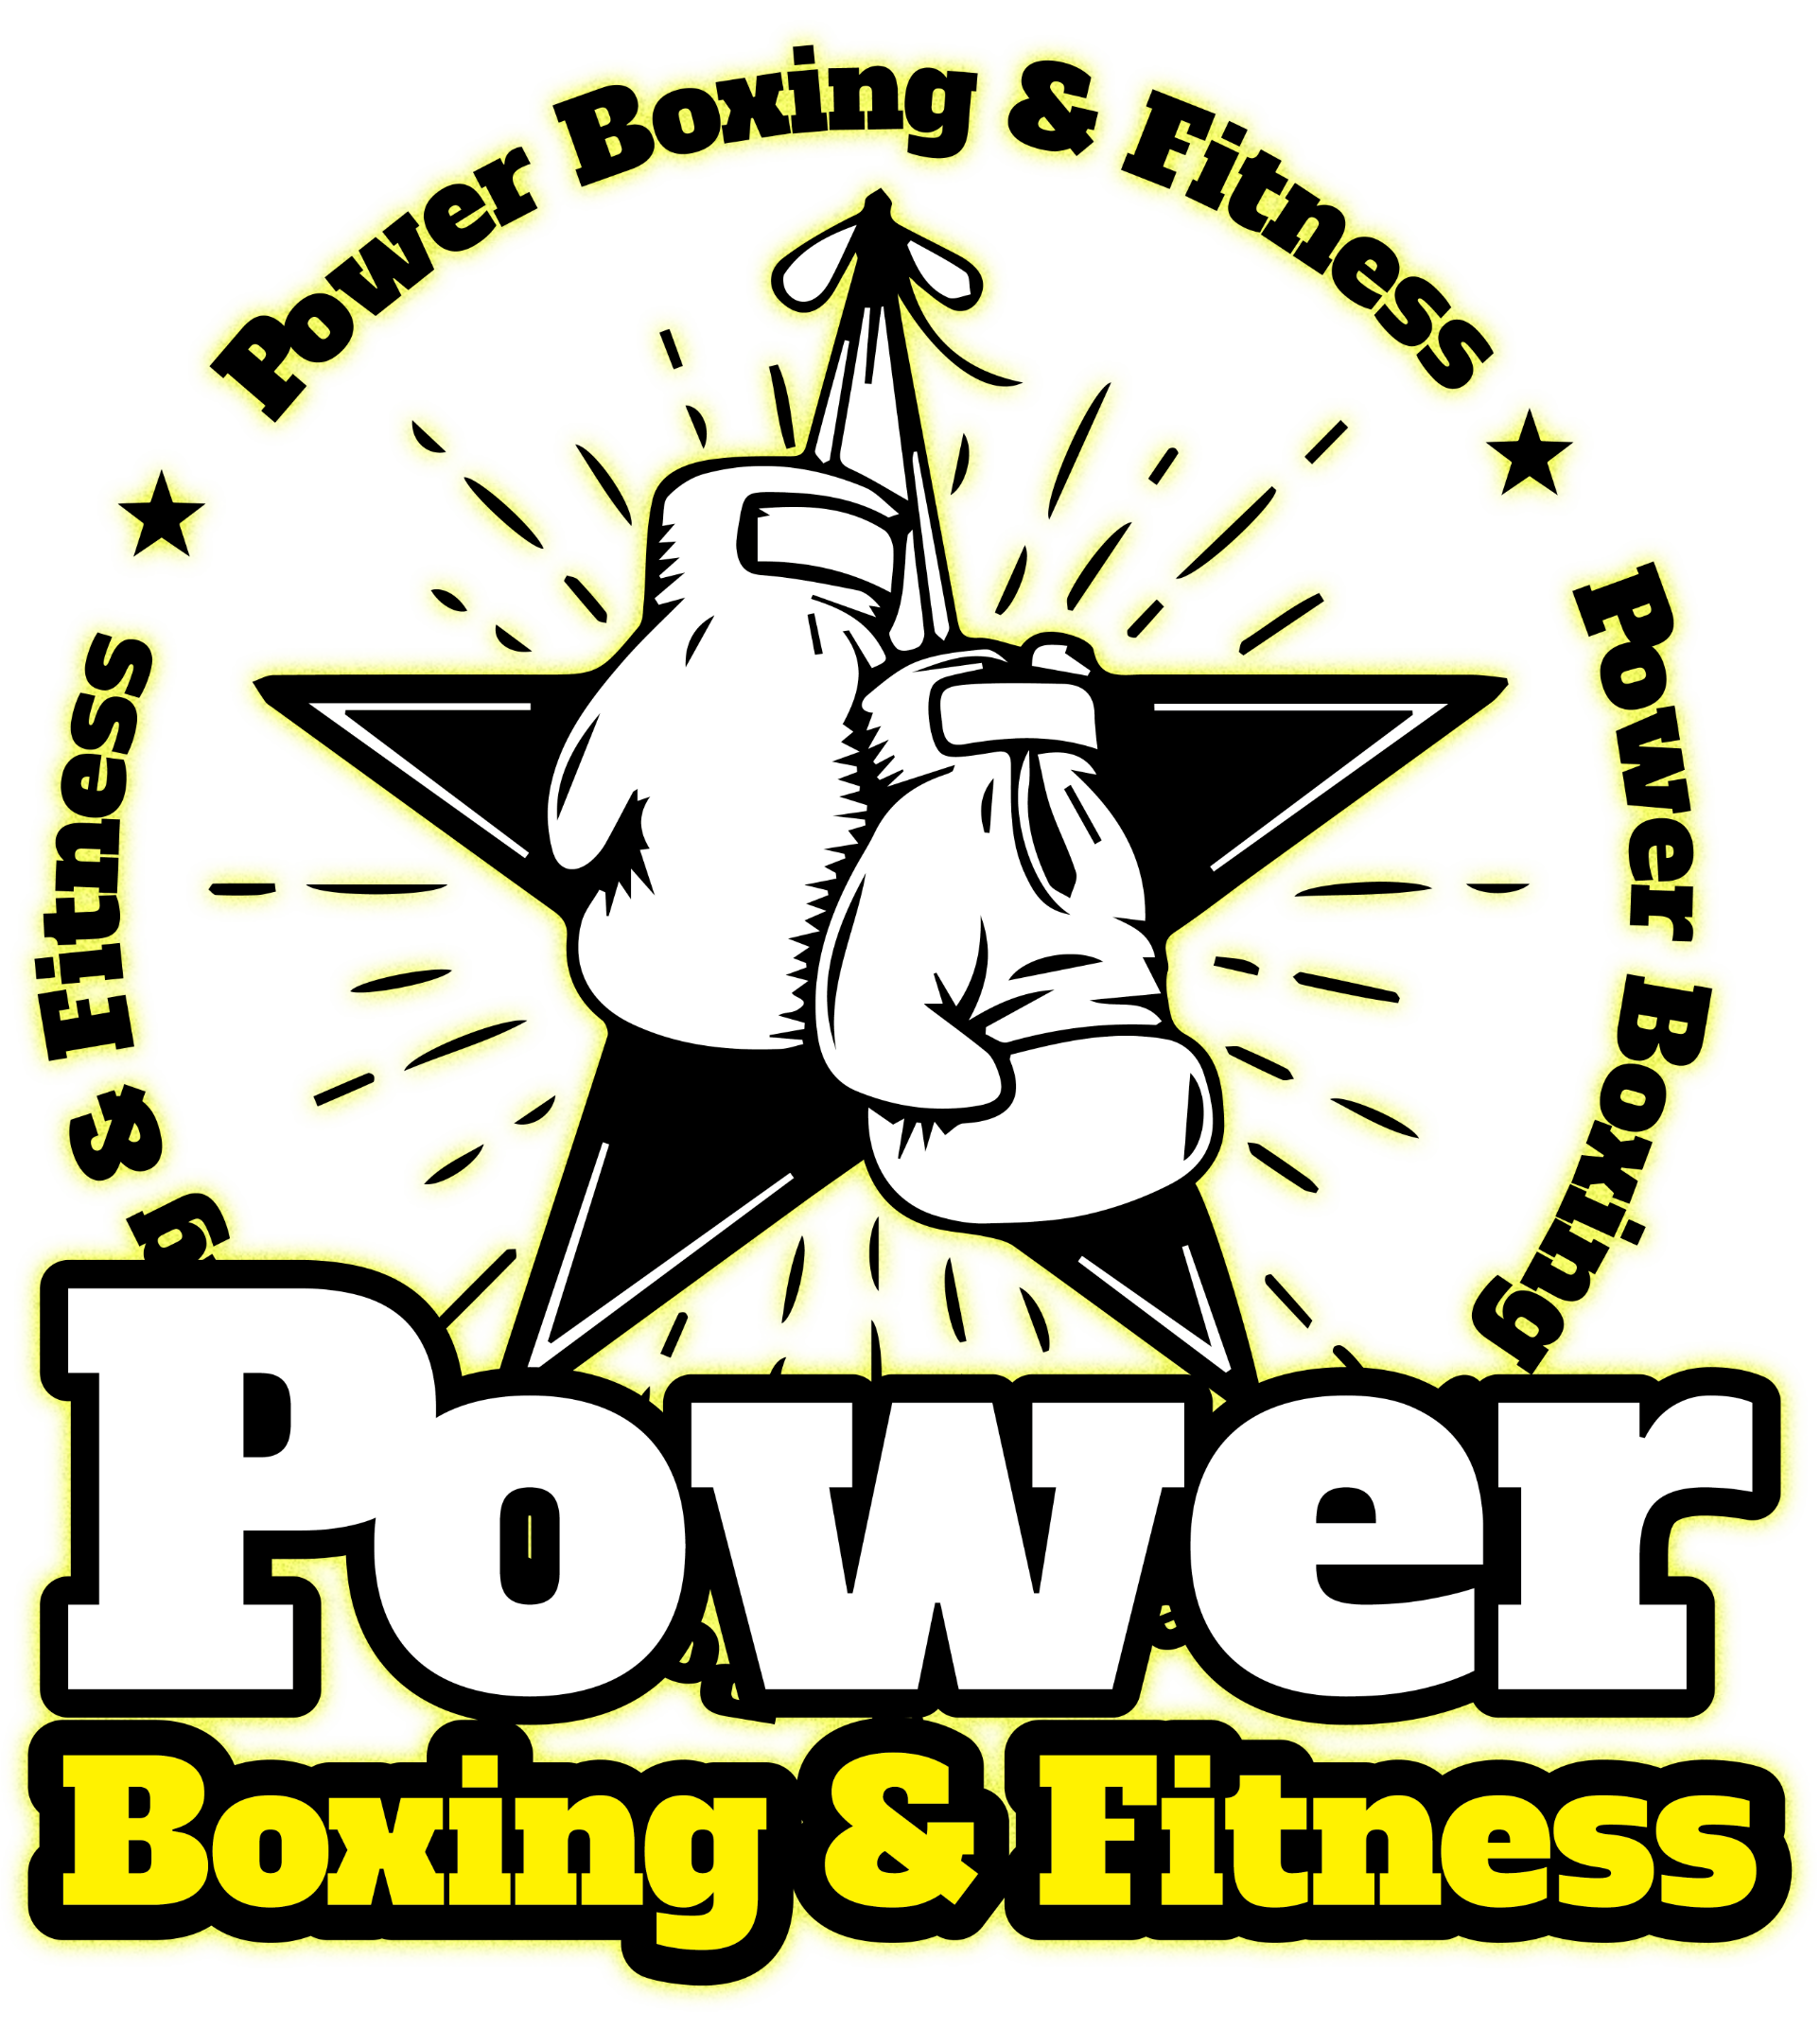 Power Boxing & Fitness